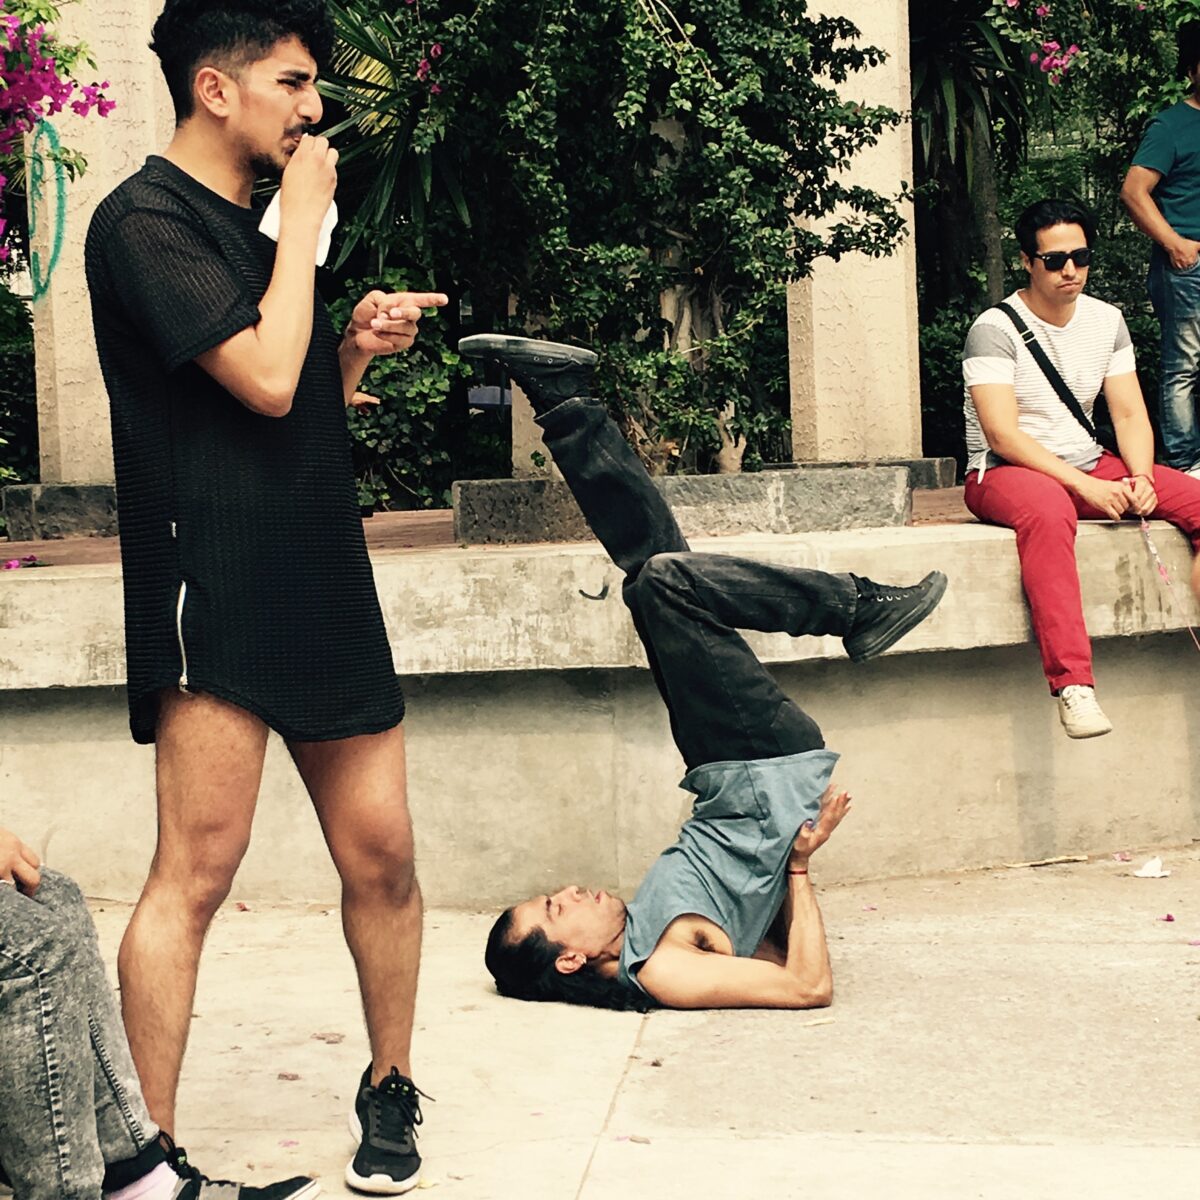 Jorge Nava of Apocalipstick (left side of image) and Héctor Victoria Vargas Payán/Vycktorya Letal Apocalipstick LaBeija (centre, performing a ballroom dance move, on his back on the ground with legs in the air), outdoors in the Parque Mexico, at an Apocalipstick Open House public rehearsal.